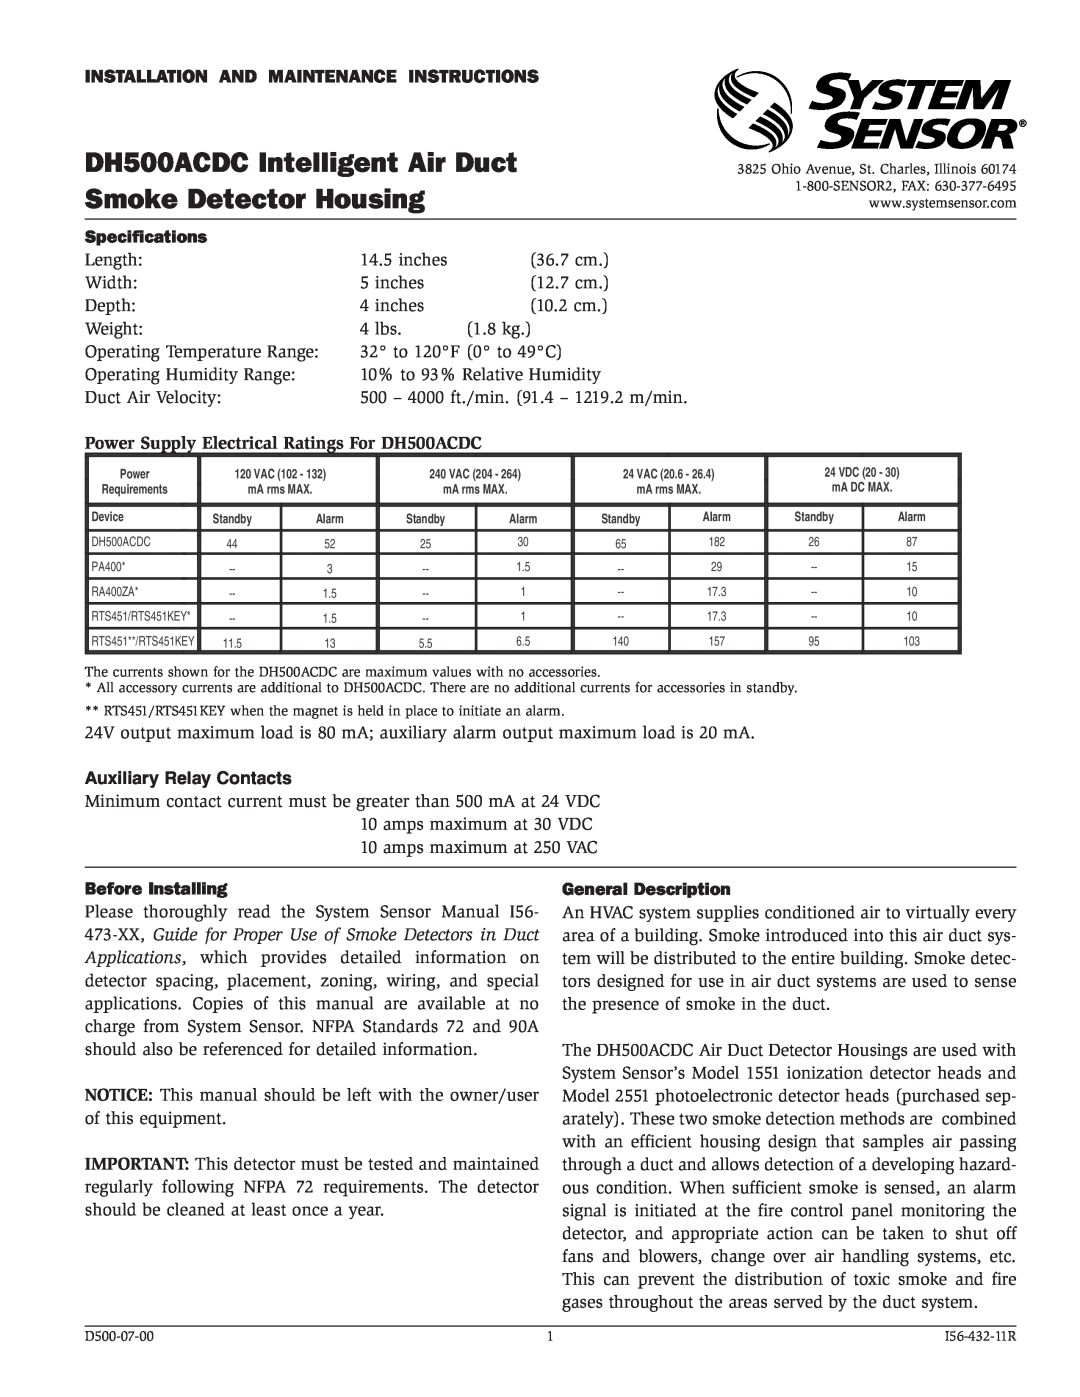 System Sensor DH500ACDC specifications Installation And Maintenance Instructions, Auxiliary Relay Contacts 